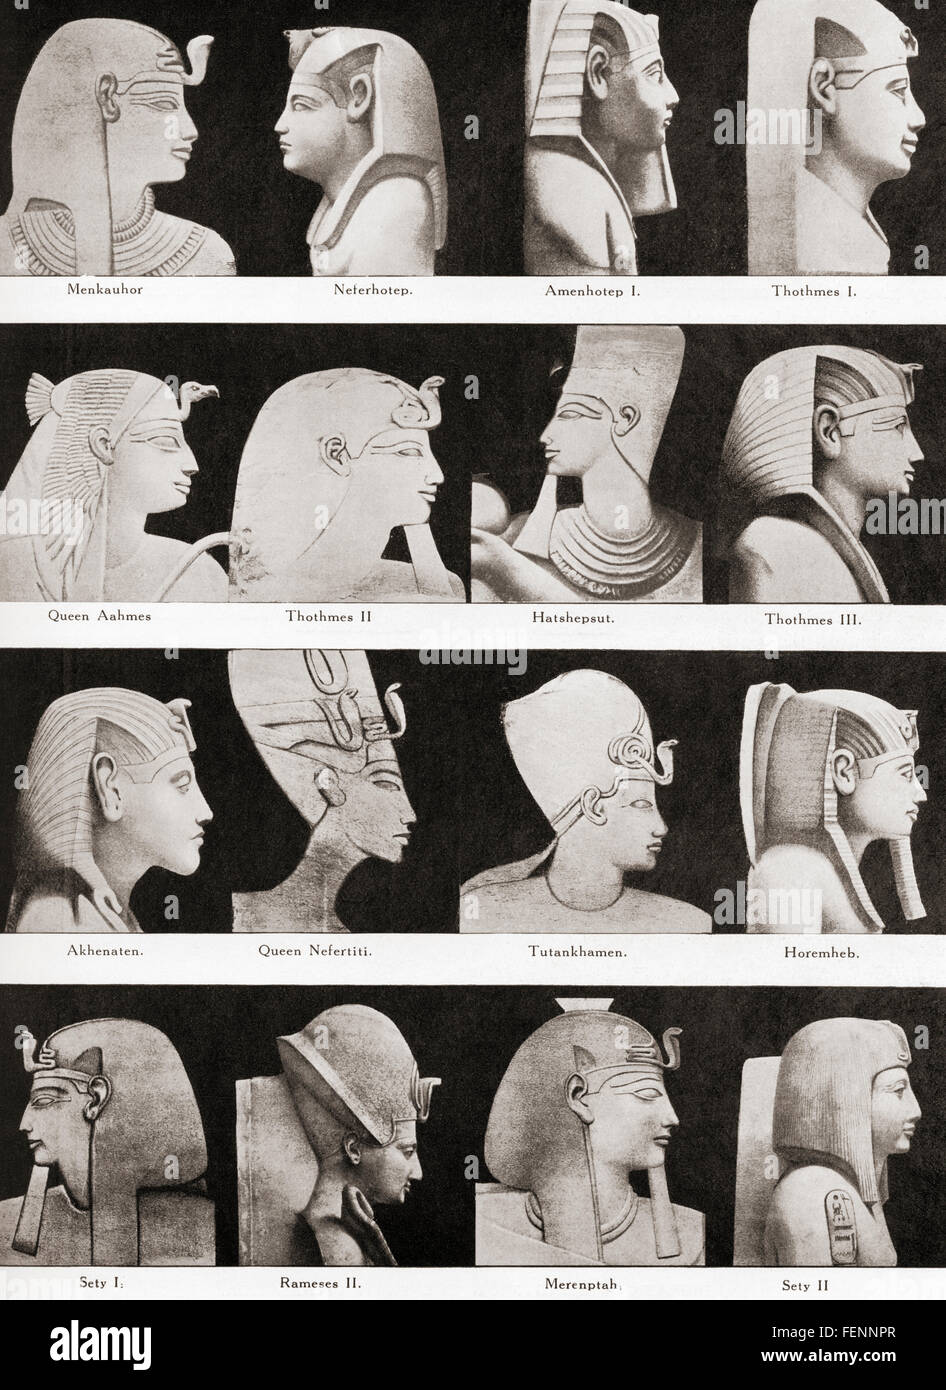 Leading kings and queens of ancient Egypt.  From top left to right; Menkauhor.  Neferhotep.  Amenhotep I.  Thothmes I.  Queen Aahmes.  Thothmes II.  Hatshepsut.  Thothmes III.  Akhenaten.  Queen Nefertiti.  Tutankhamen.  Horemheb.  Sety I.  Rameses II.  Merenptah.  Sety II.  From Hutchinson's History of the Nations, published 1900. Stock Photo